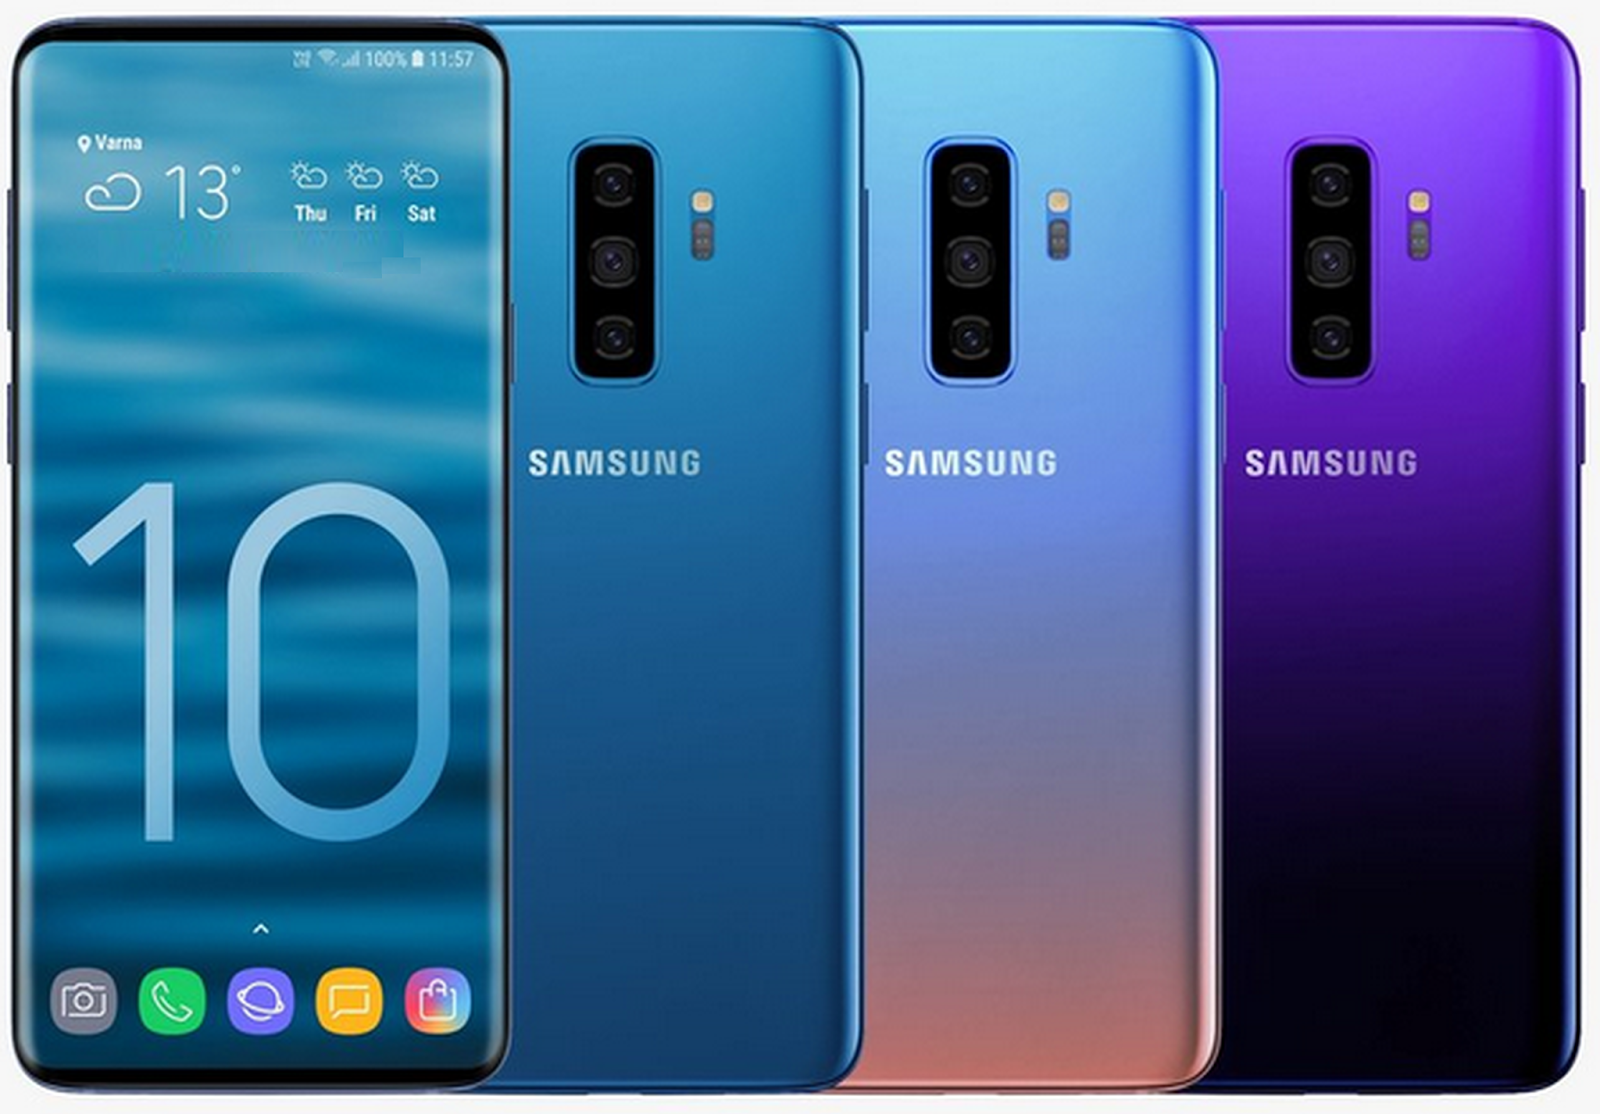 Galaxy S10 Manual PDF With Tutorial And Samsung Galaxy S10 Plus User Guide